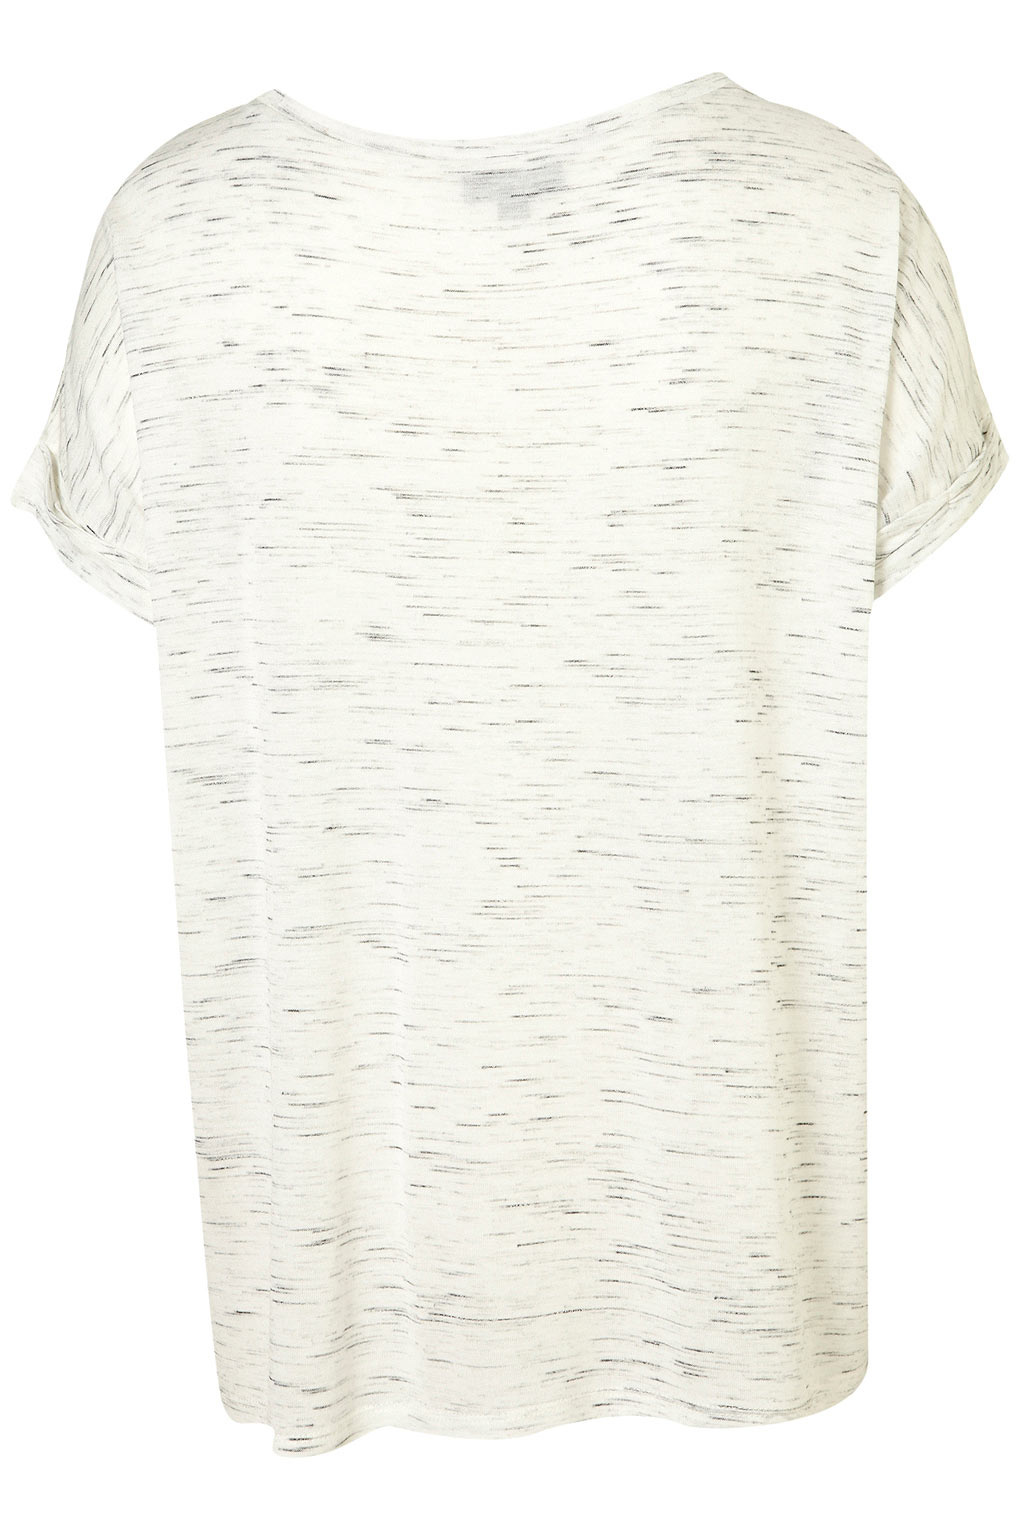 Lyst - Topshop Fleck T-shirt in White